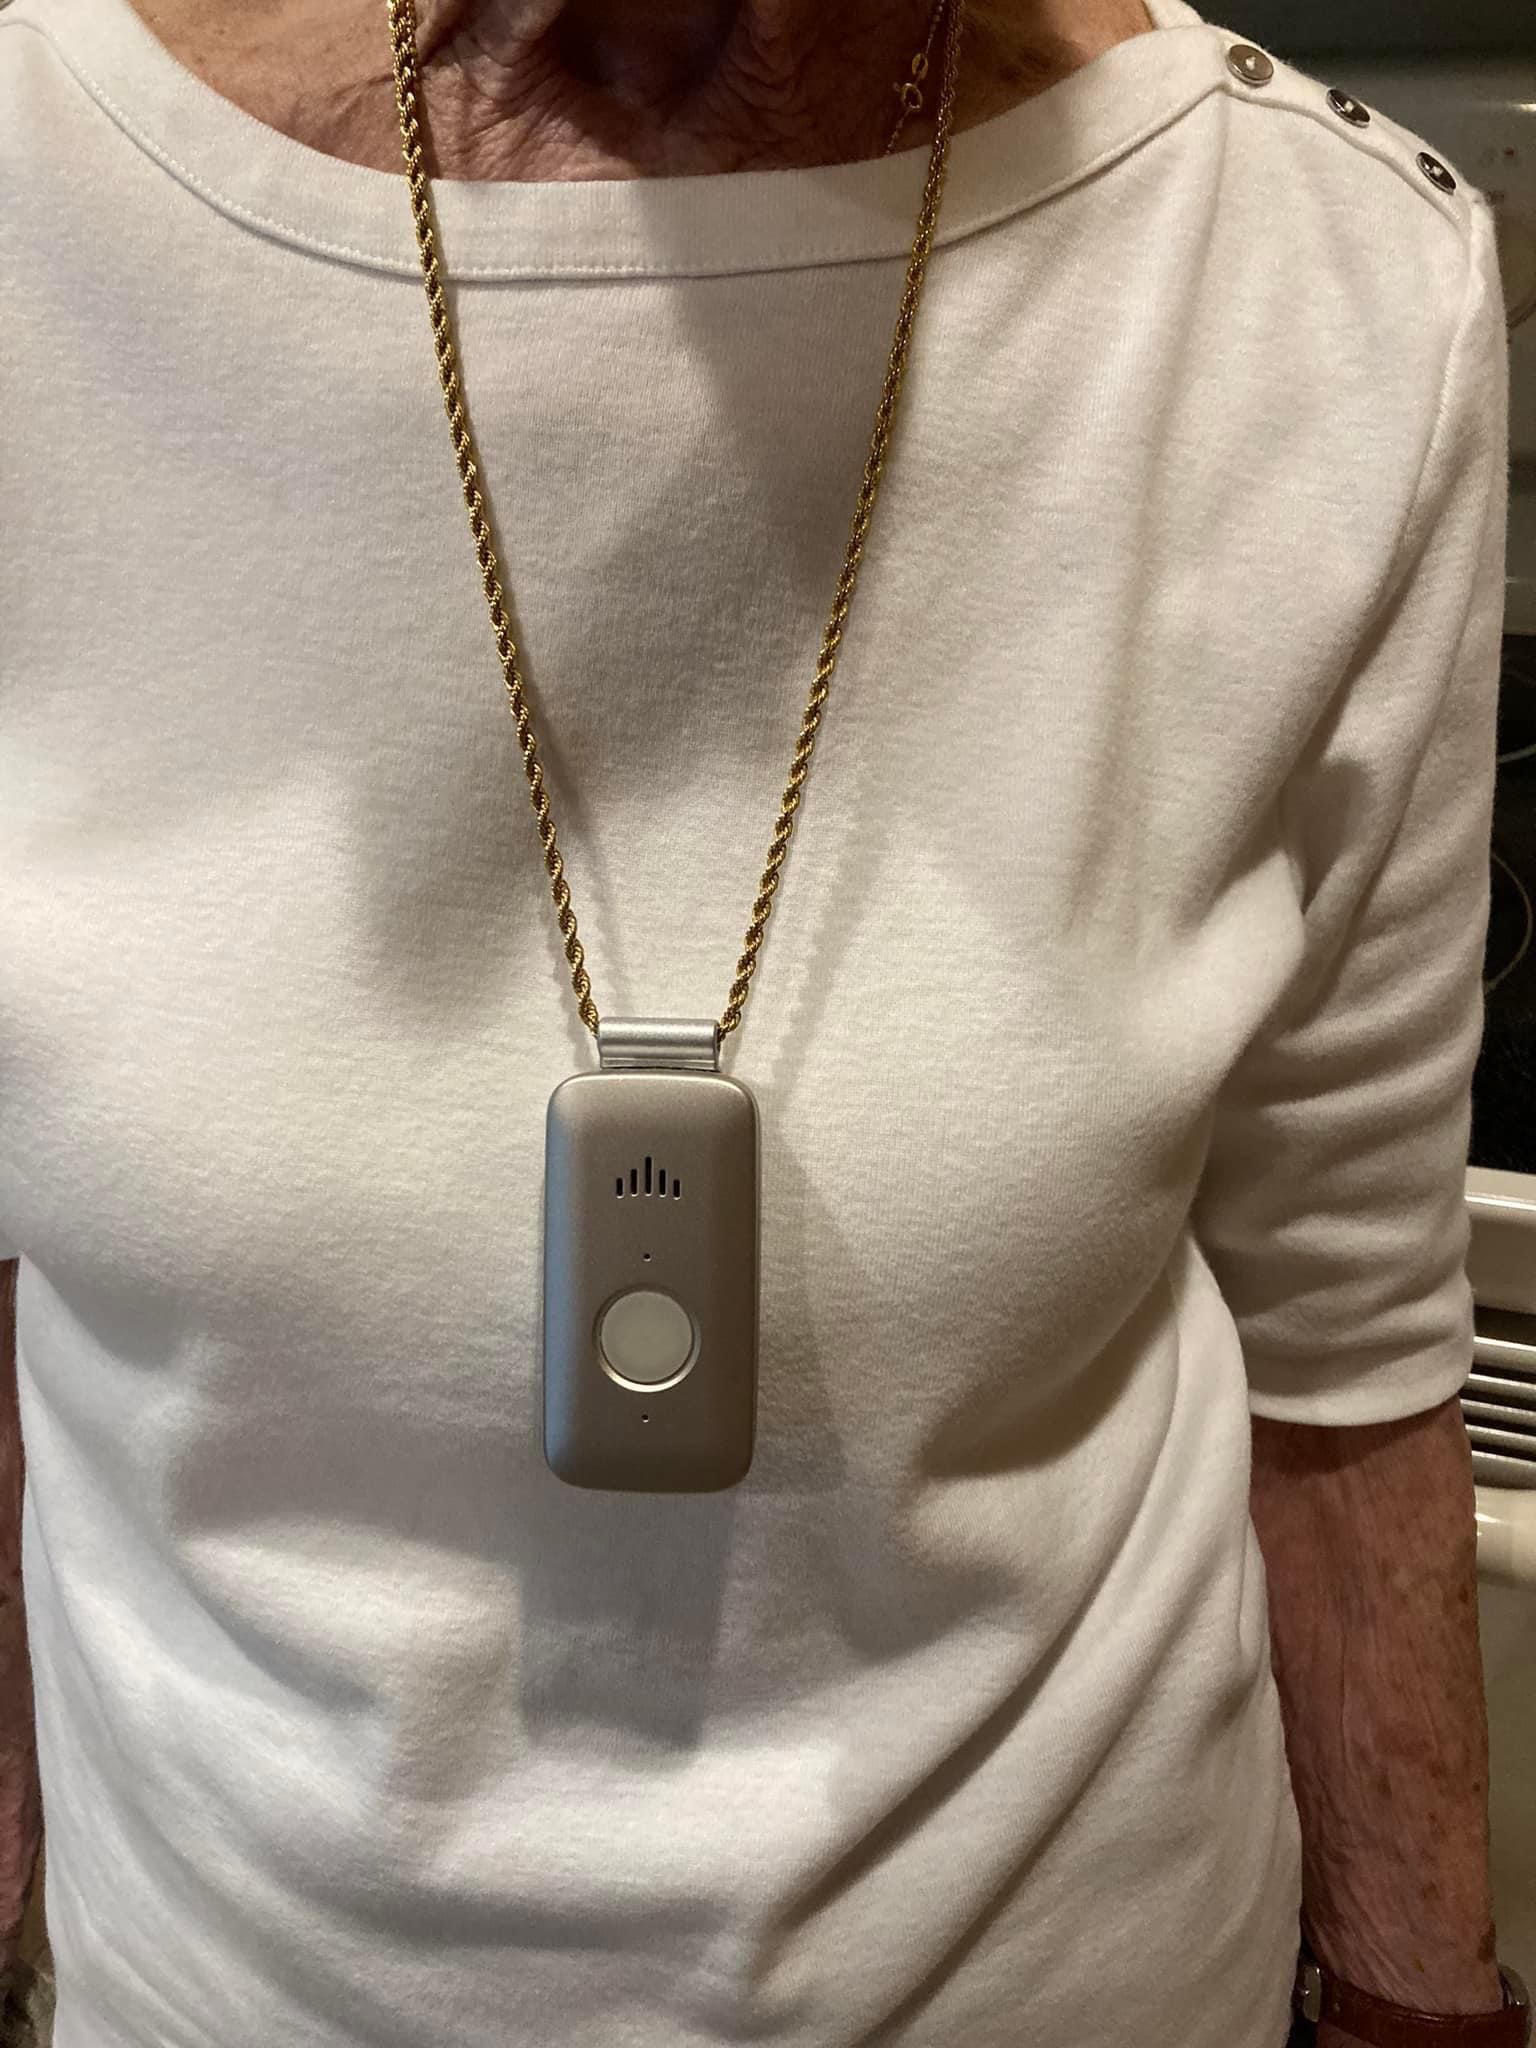 This is the most gangster shit I’ve ever seen. Our customer put her gold chain on her Life Alert button. She said, “If I’m slippin I better be drippin.”